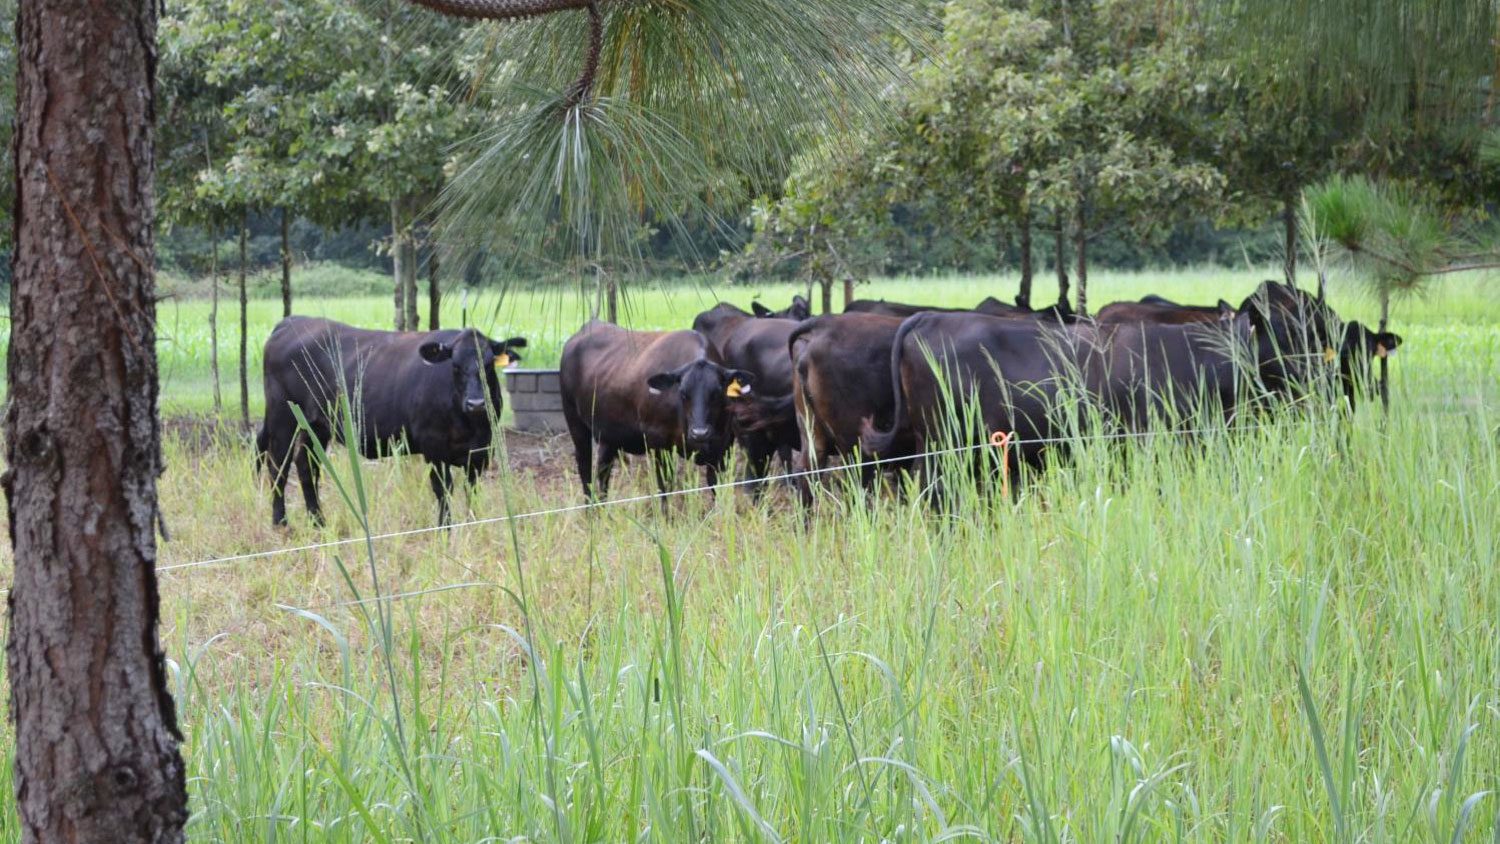 Black Angus cattle grazing amid trees.